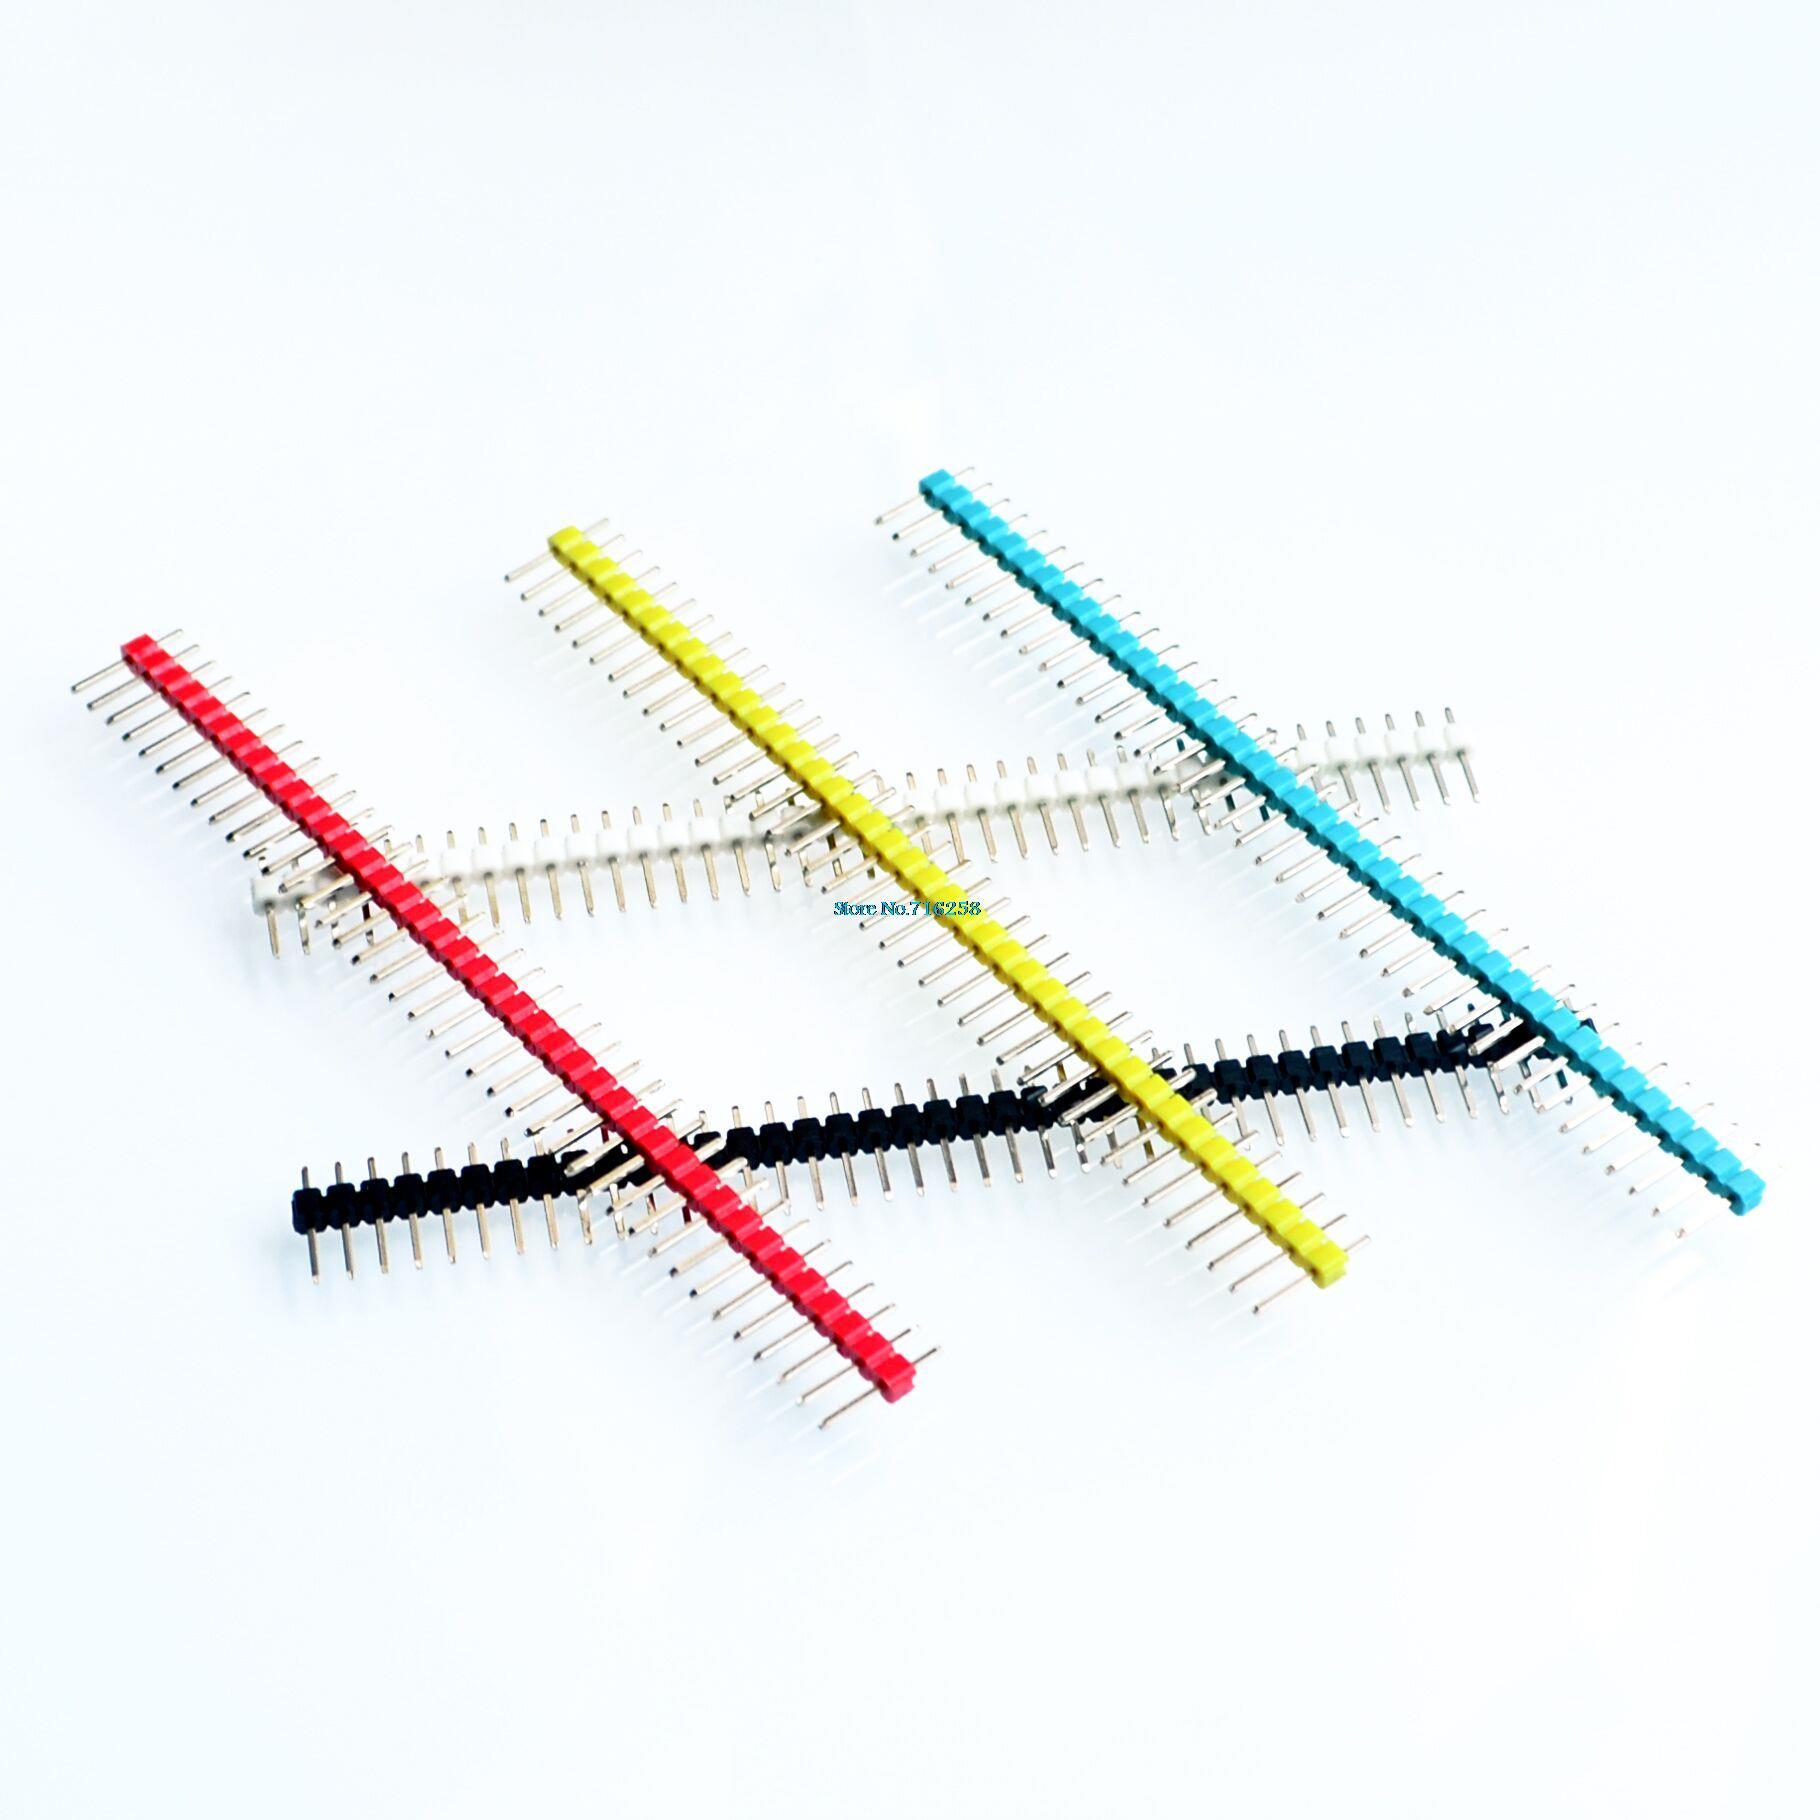 50pcs/lot 2.54mm Black + White + Red + Yellow + Blue Single Row Male 1X40 Pin Header Strip Gold-plated ROHS